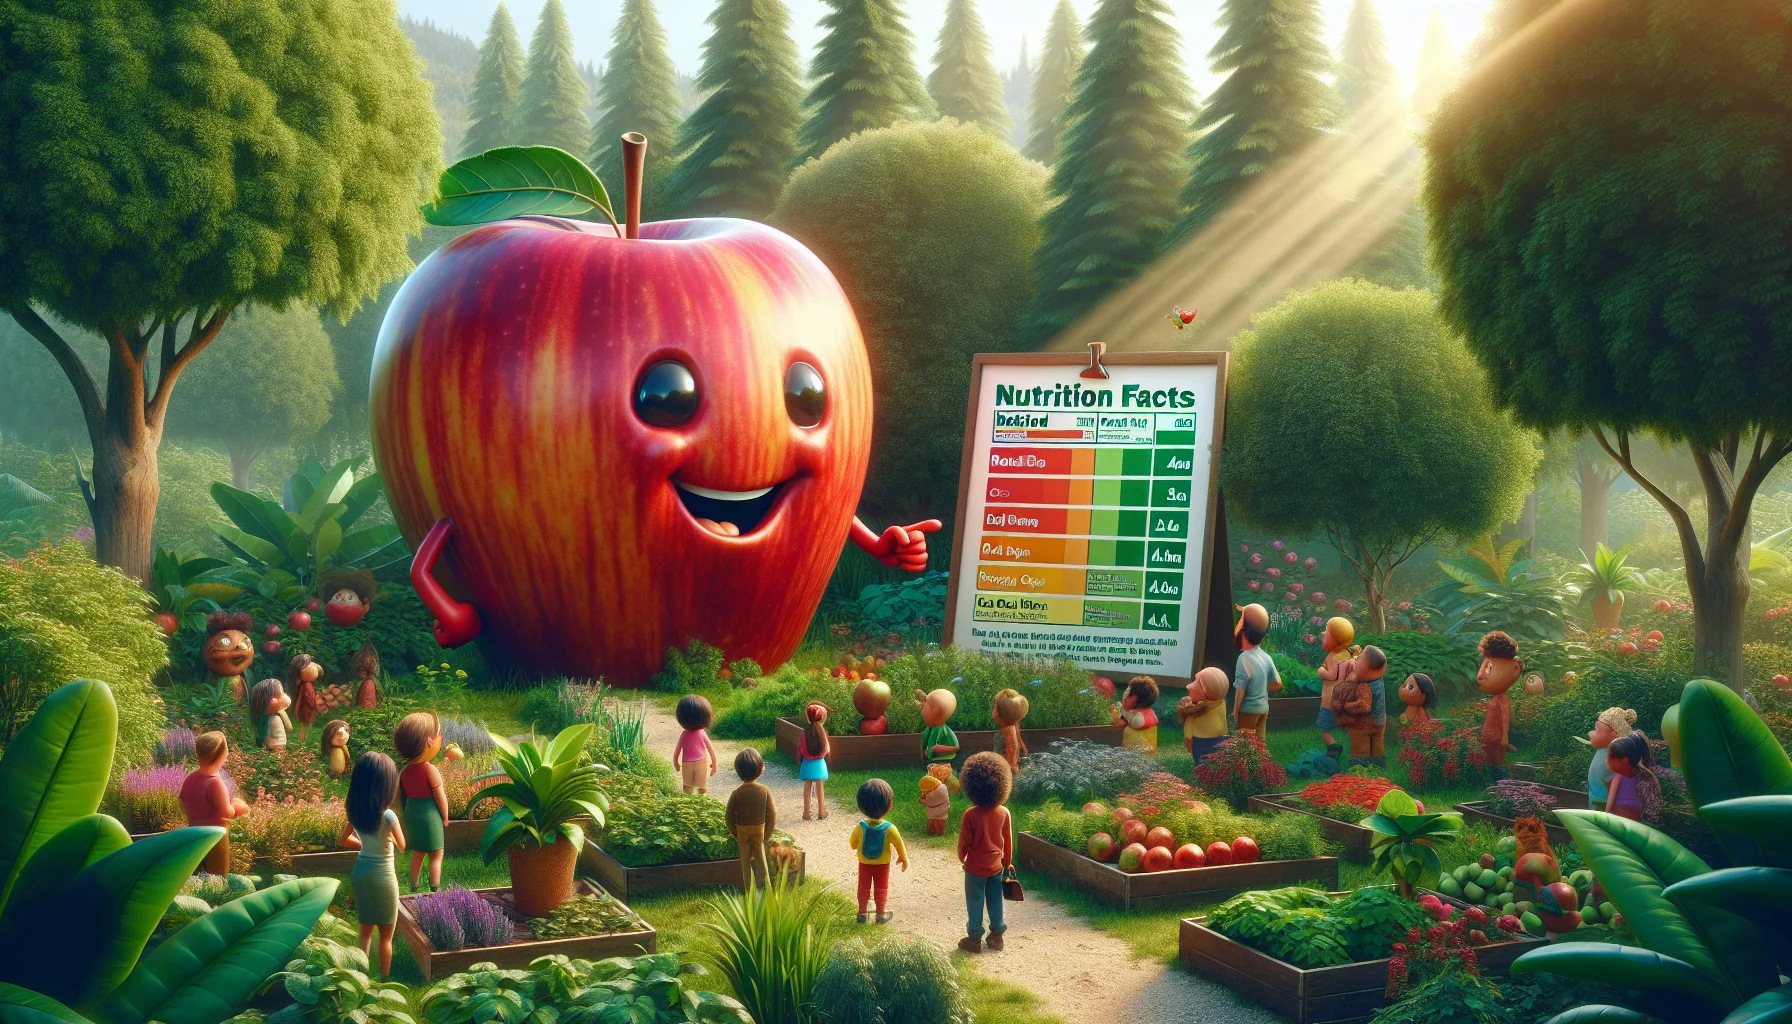 Create a comical and enticing scene set in a lush garden filled with diverse plants and trees, with a primary focus on a colossal red delicious apple. This apple stands majestically amidst the thriving garden, surrounded by a crowd of people of different descents and genders, all looking in awe. The red delicious apple comes to life, sporting a friendly grin and pointing to a chart floating beside it. The chart humorously showcases the nutrition facts of red delicious apples, painted on it with varying vivid colors. Sunlight filters through the trees, adds a radiant glow to the scene, making it a captivating visual treat, promoting both nutrition and the joy of gardening.